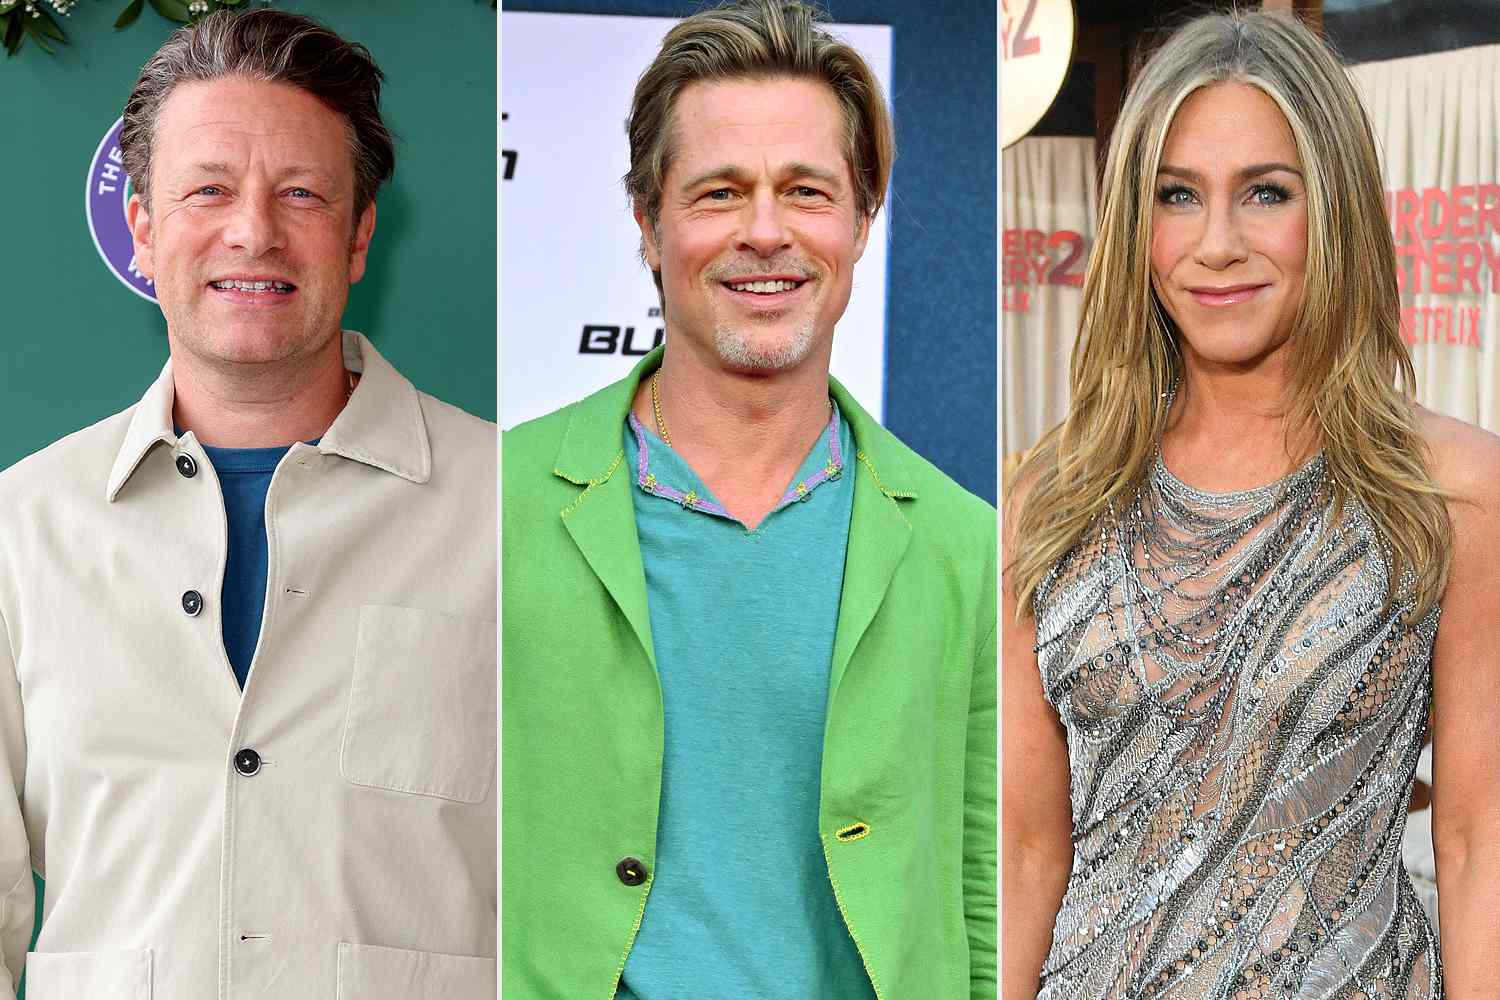 Chef Jamie Oliver Says He Was ‘Brad Pitt’s 40th Birthday Present’ from Jennifer Aniston While They Were Married